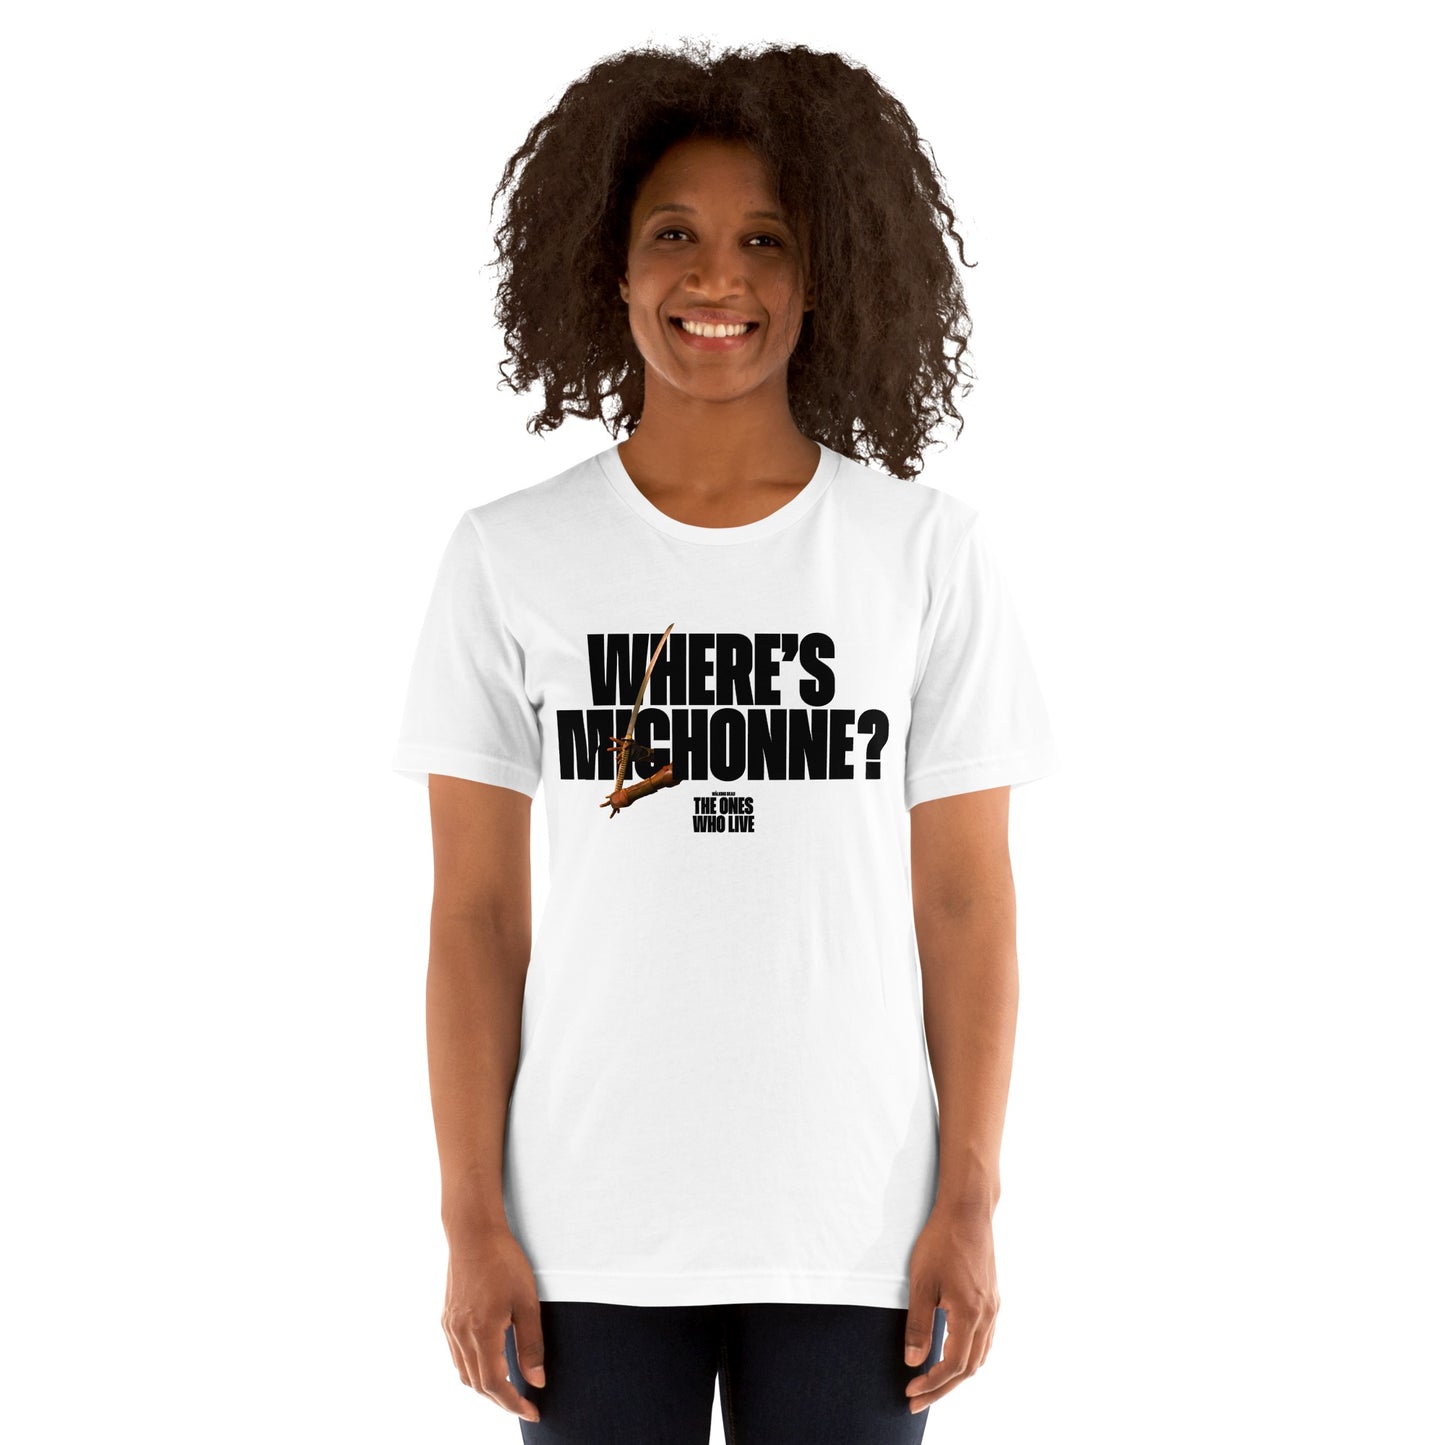 The Walking Dead: The Ones Who Live Where's Michonne? Katana Adult T-shirt